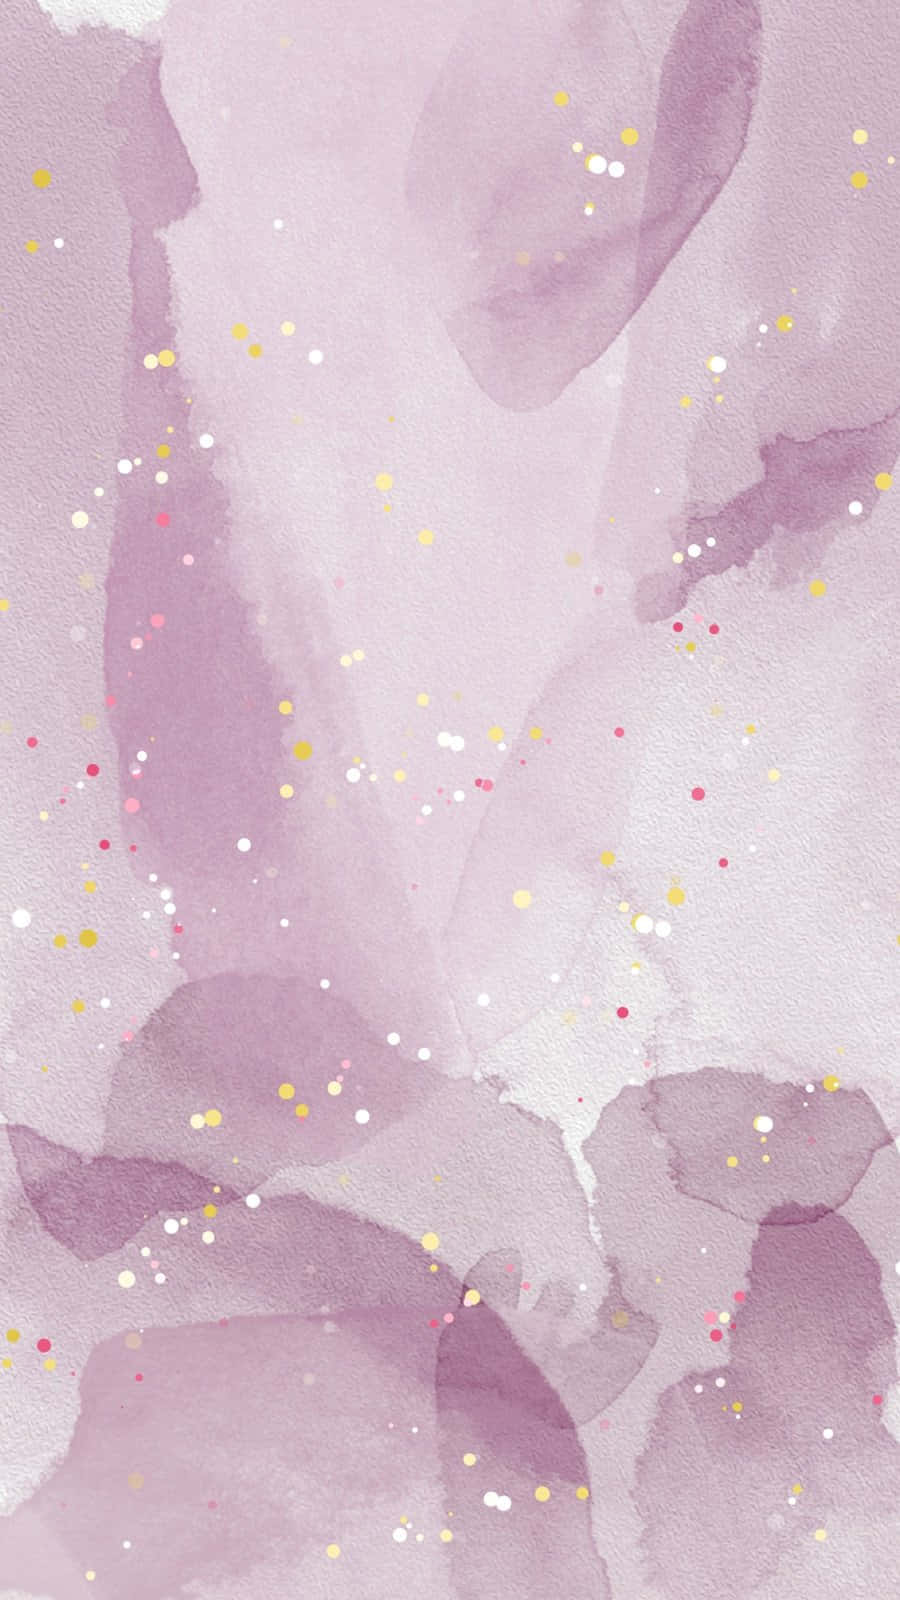 Pink Watercolor Splashes Background Wallpaper